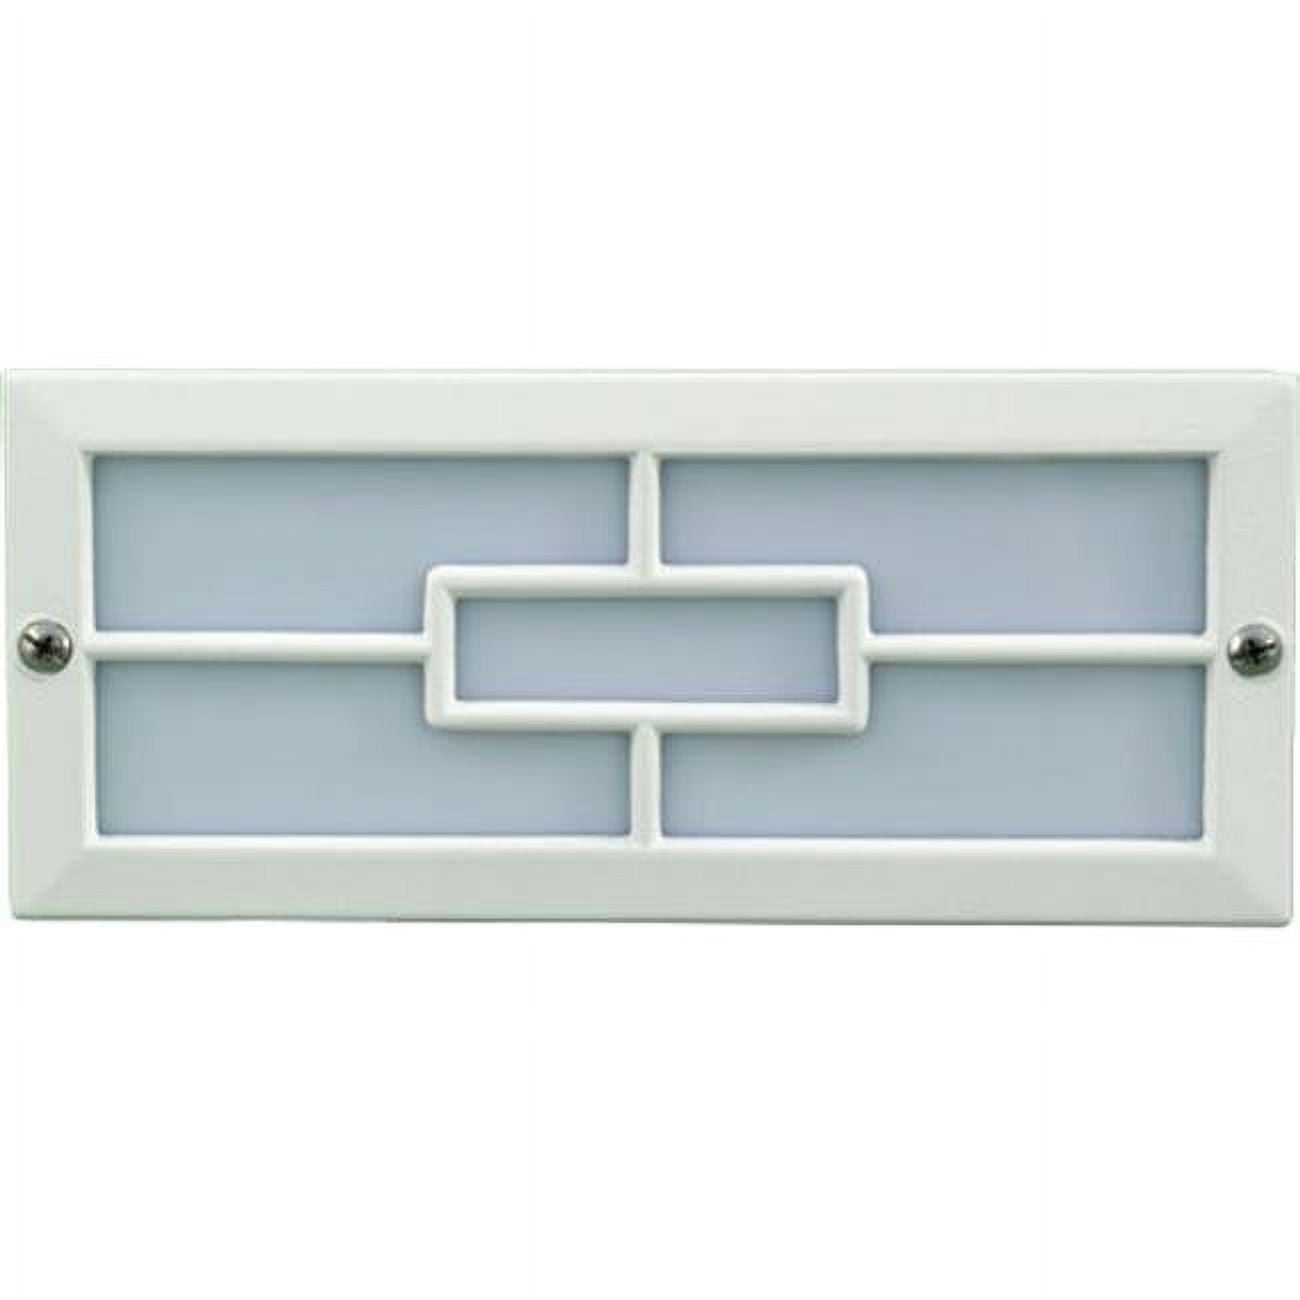 Picture of Dabmar Lighting LV636-W Cast Aluminum Recessed Brick, Step & Wall Light, White - 4 x 9.13 x 3.25 in.